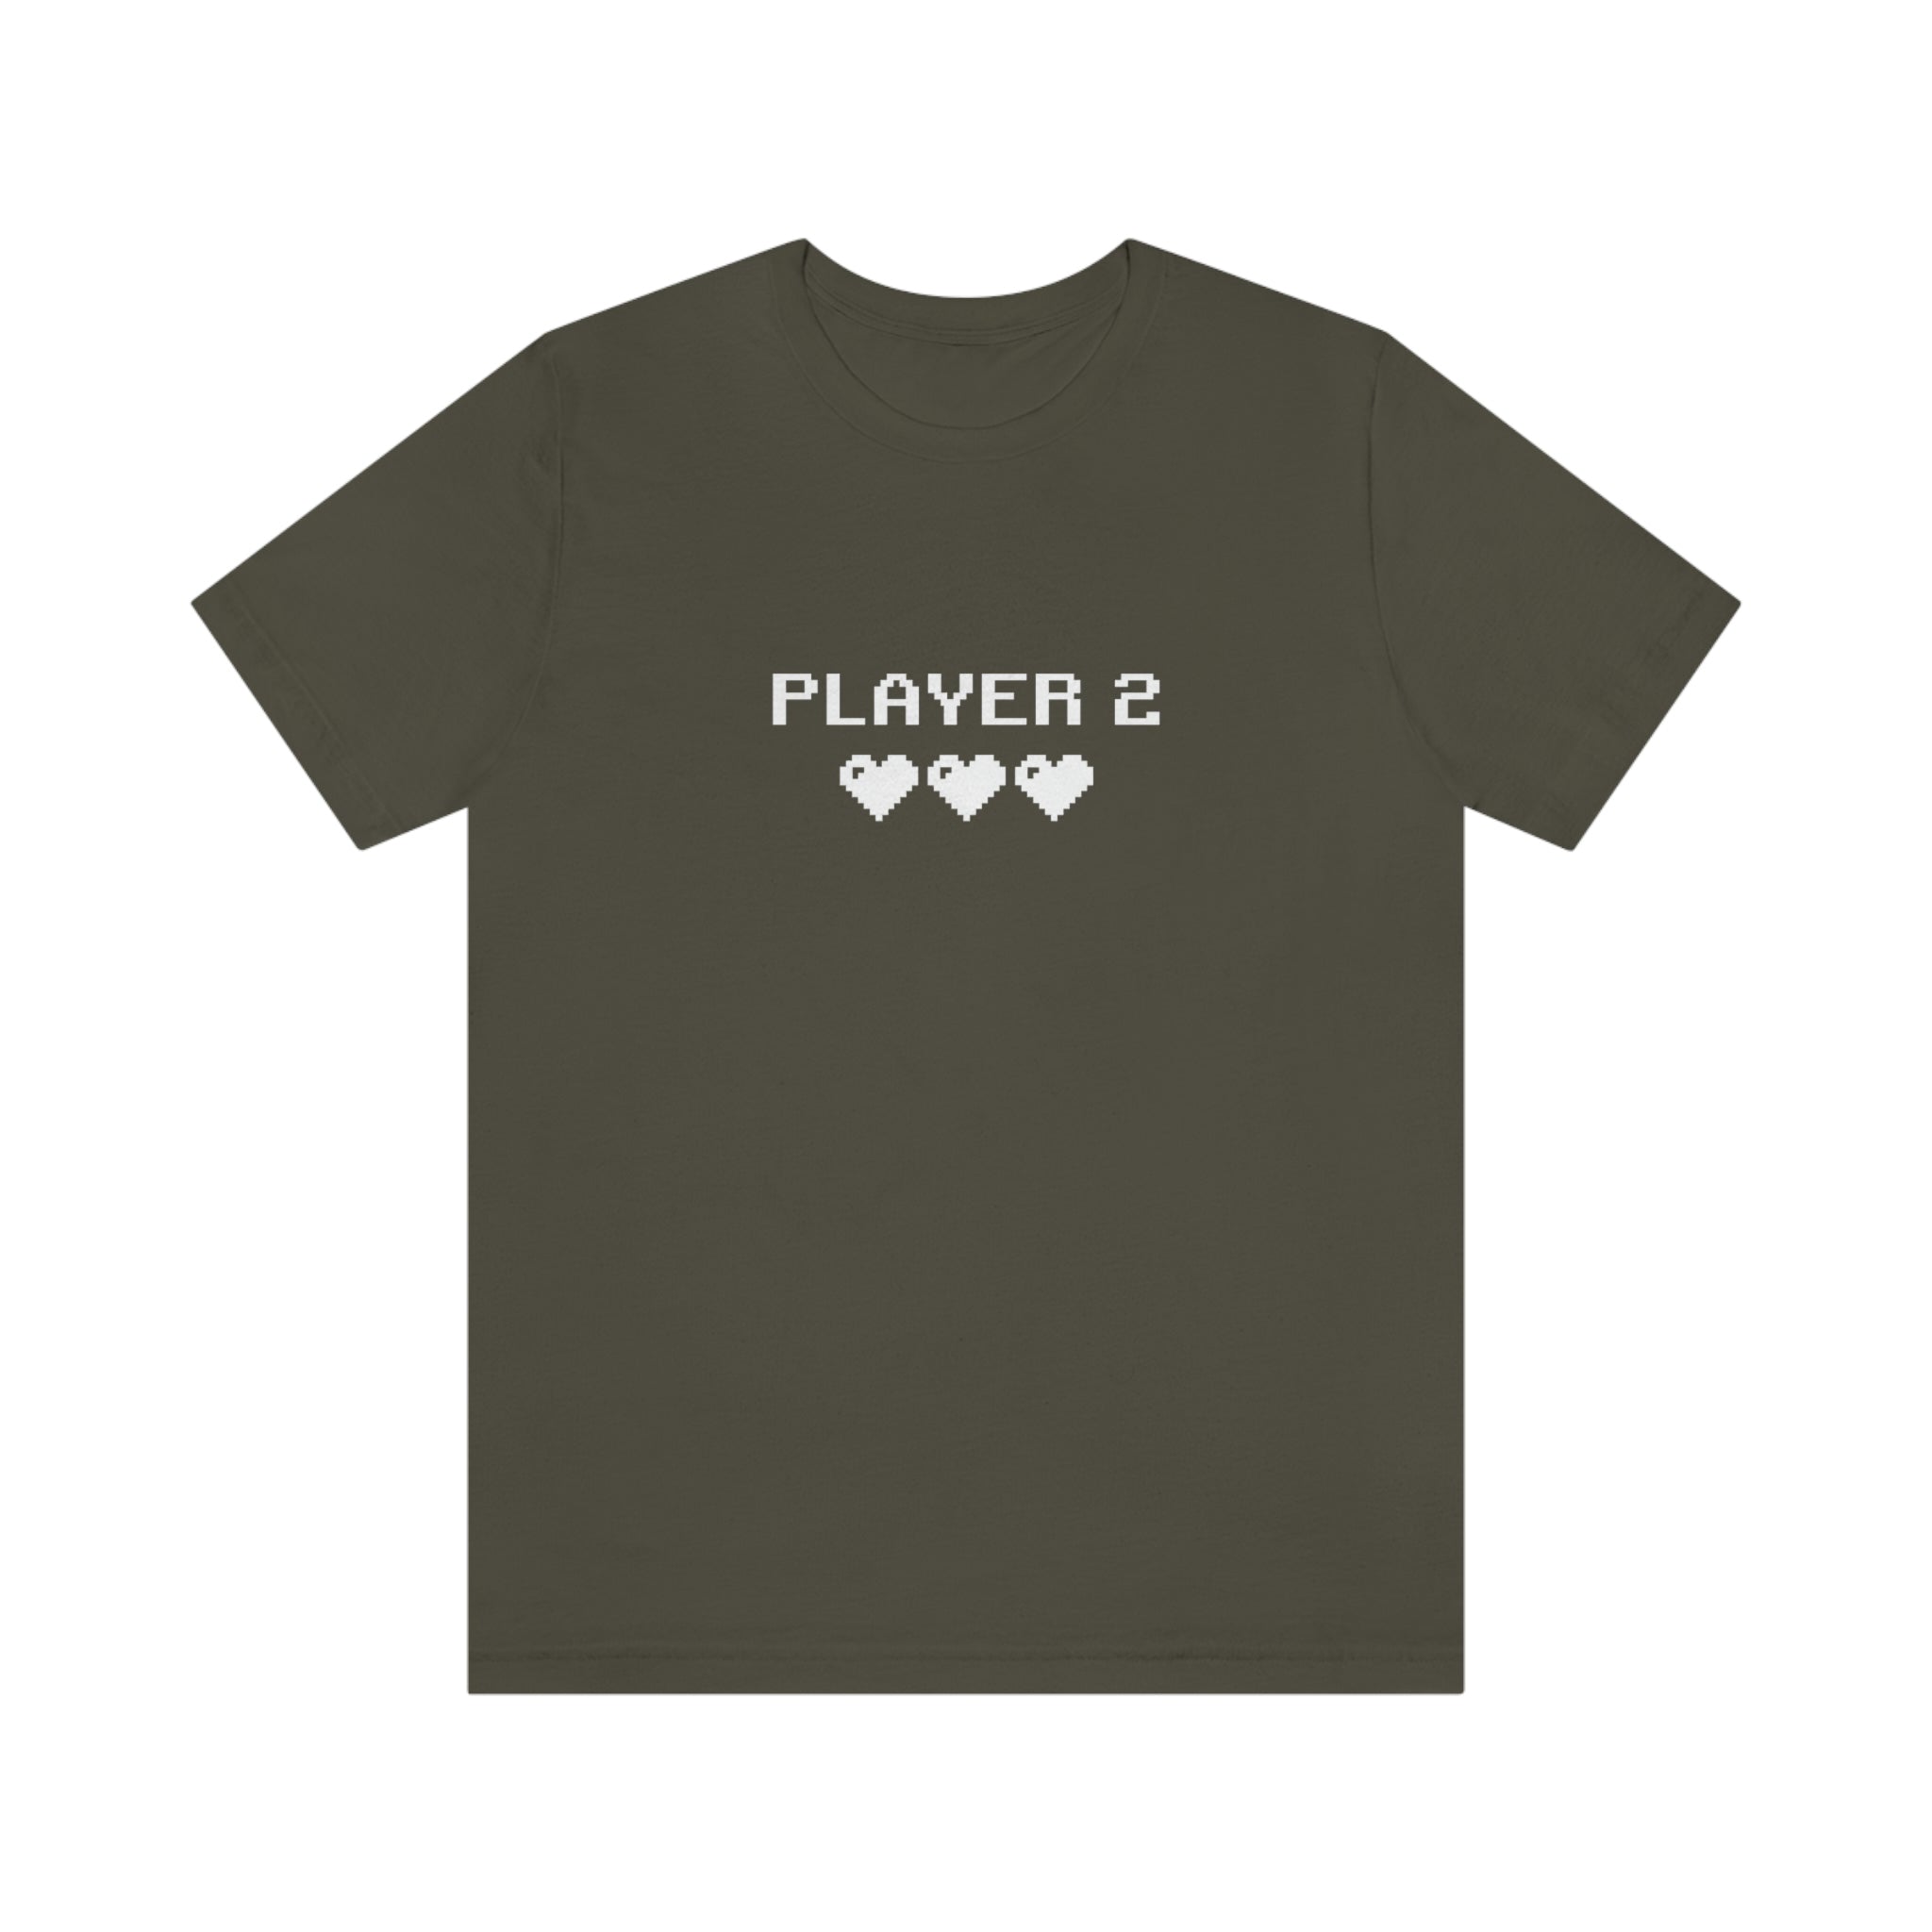 Player 2 Shirt - Gaming T-shirt - Gift for Gamers